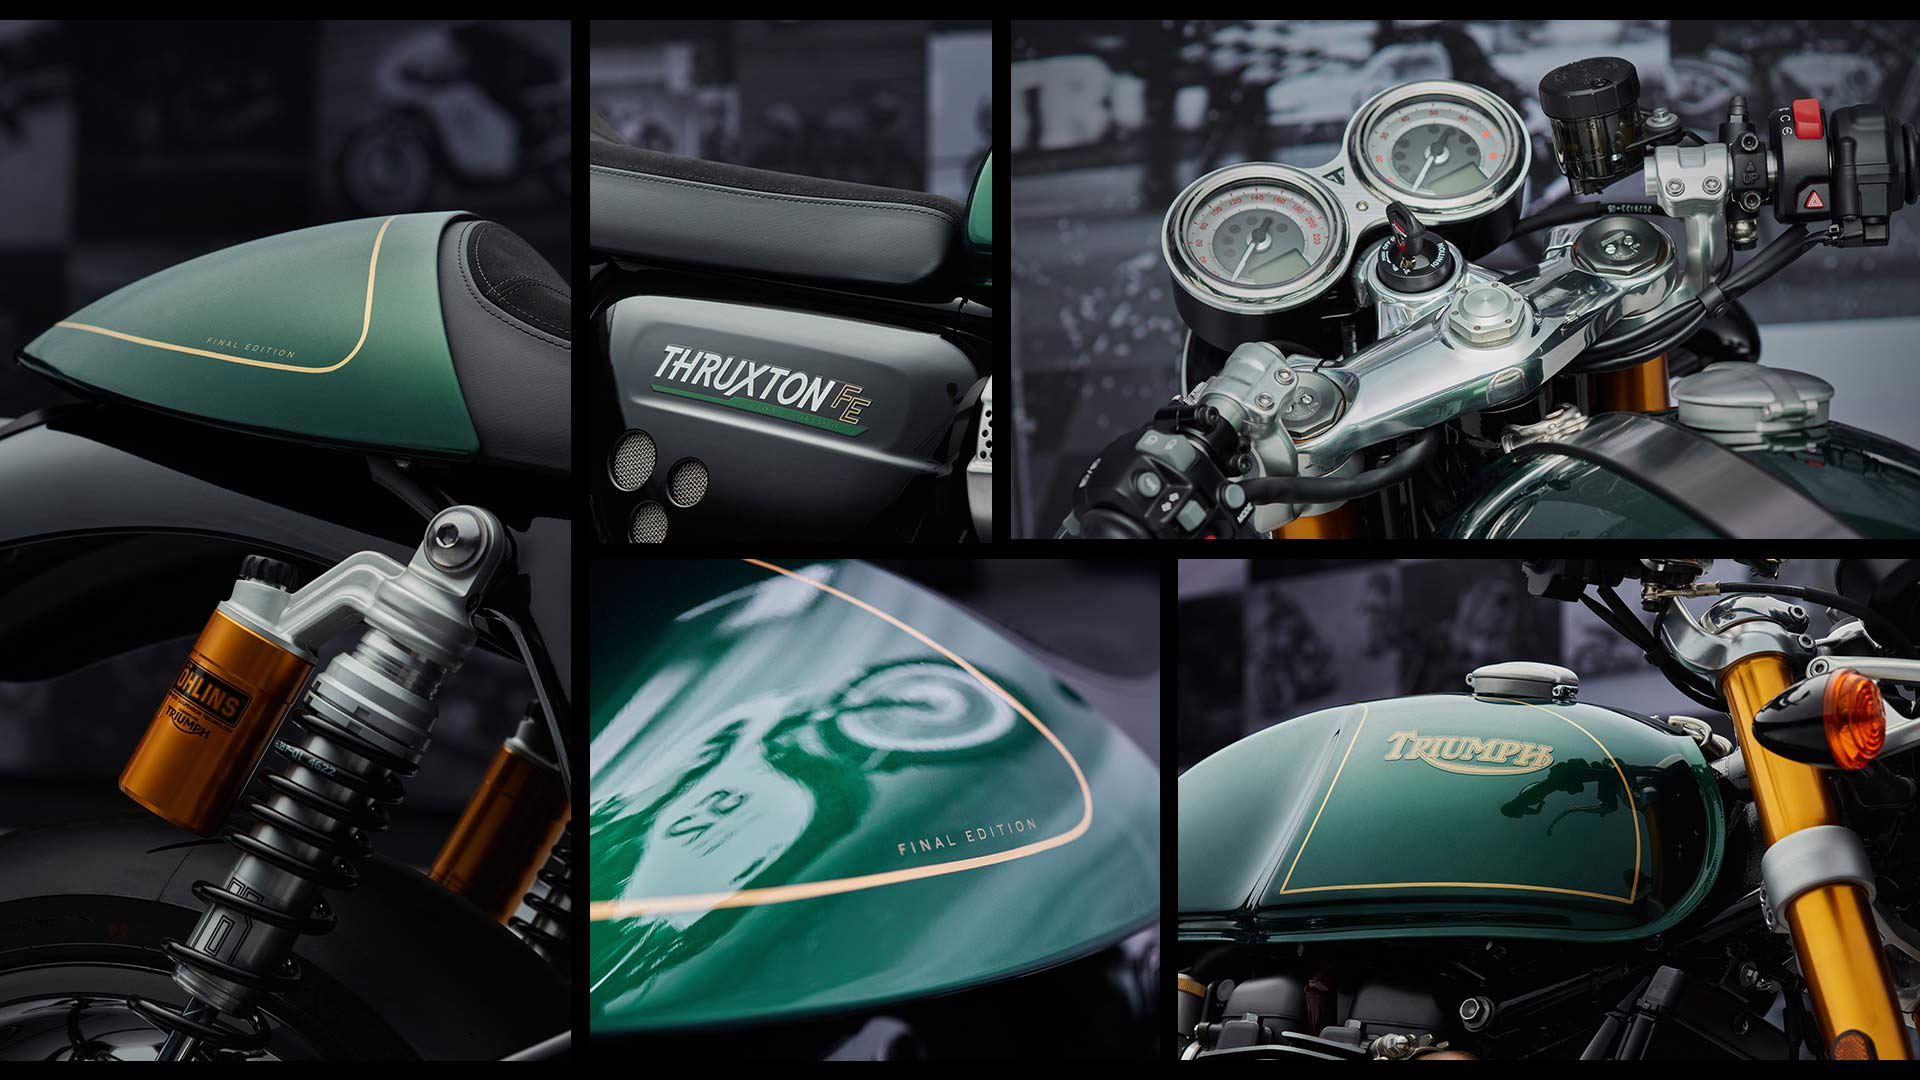 Thruxton Final Edition | For the Ride